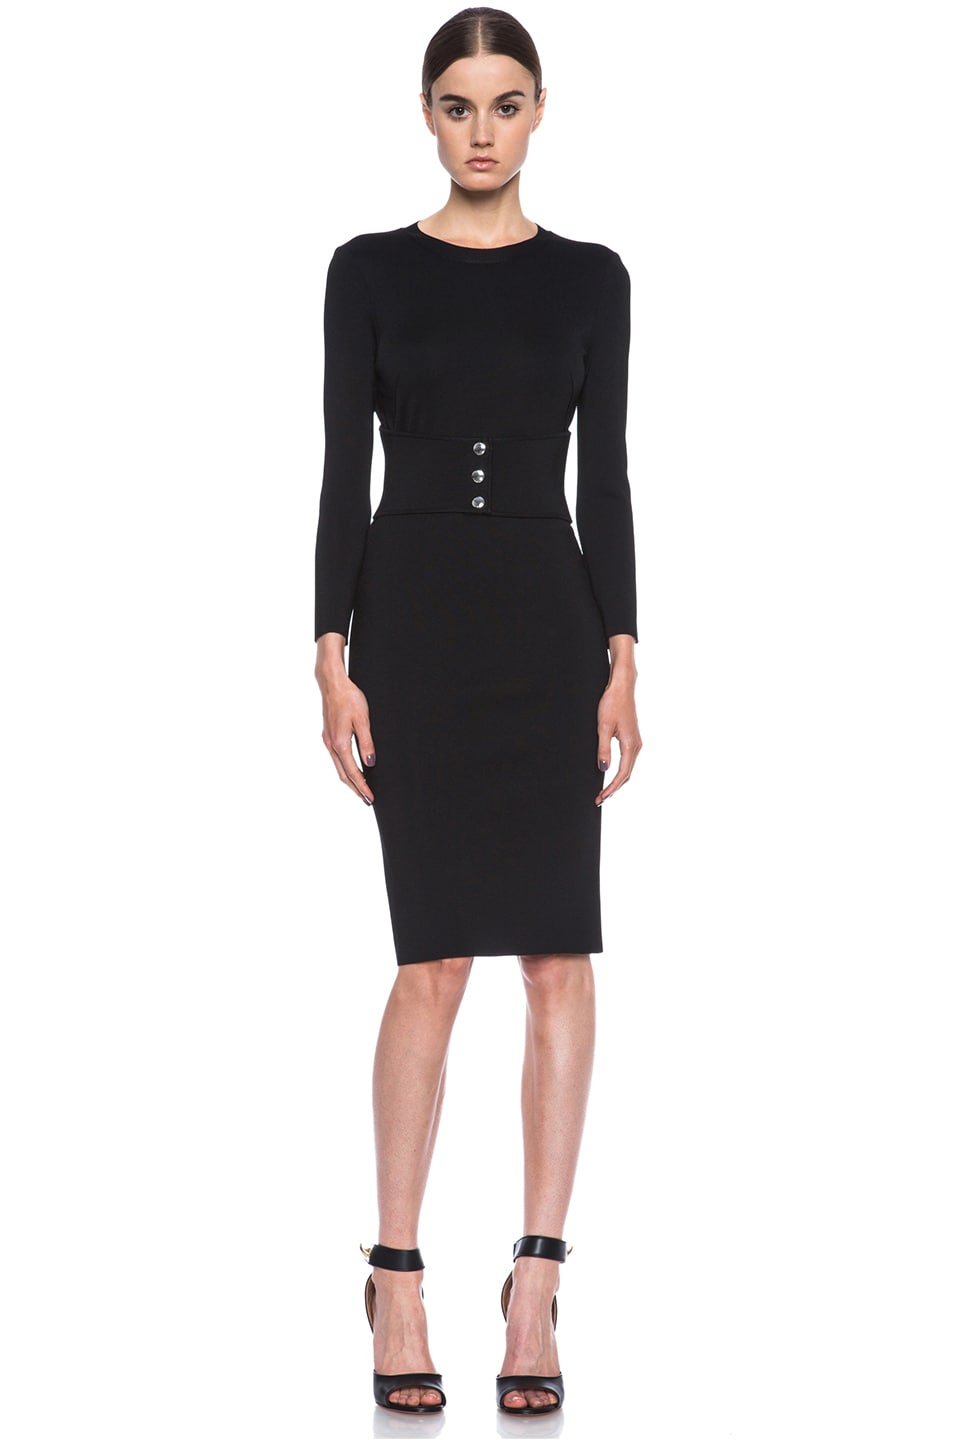 Givenchy Structured Jersey Fitted Dress with Corset Belt in Black | FWRD